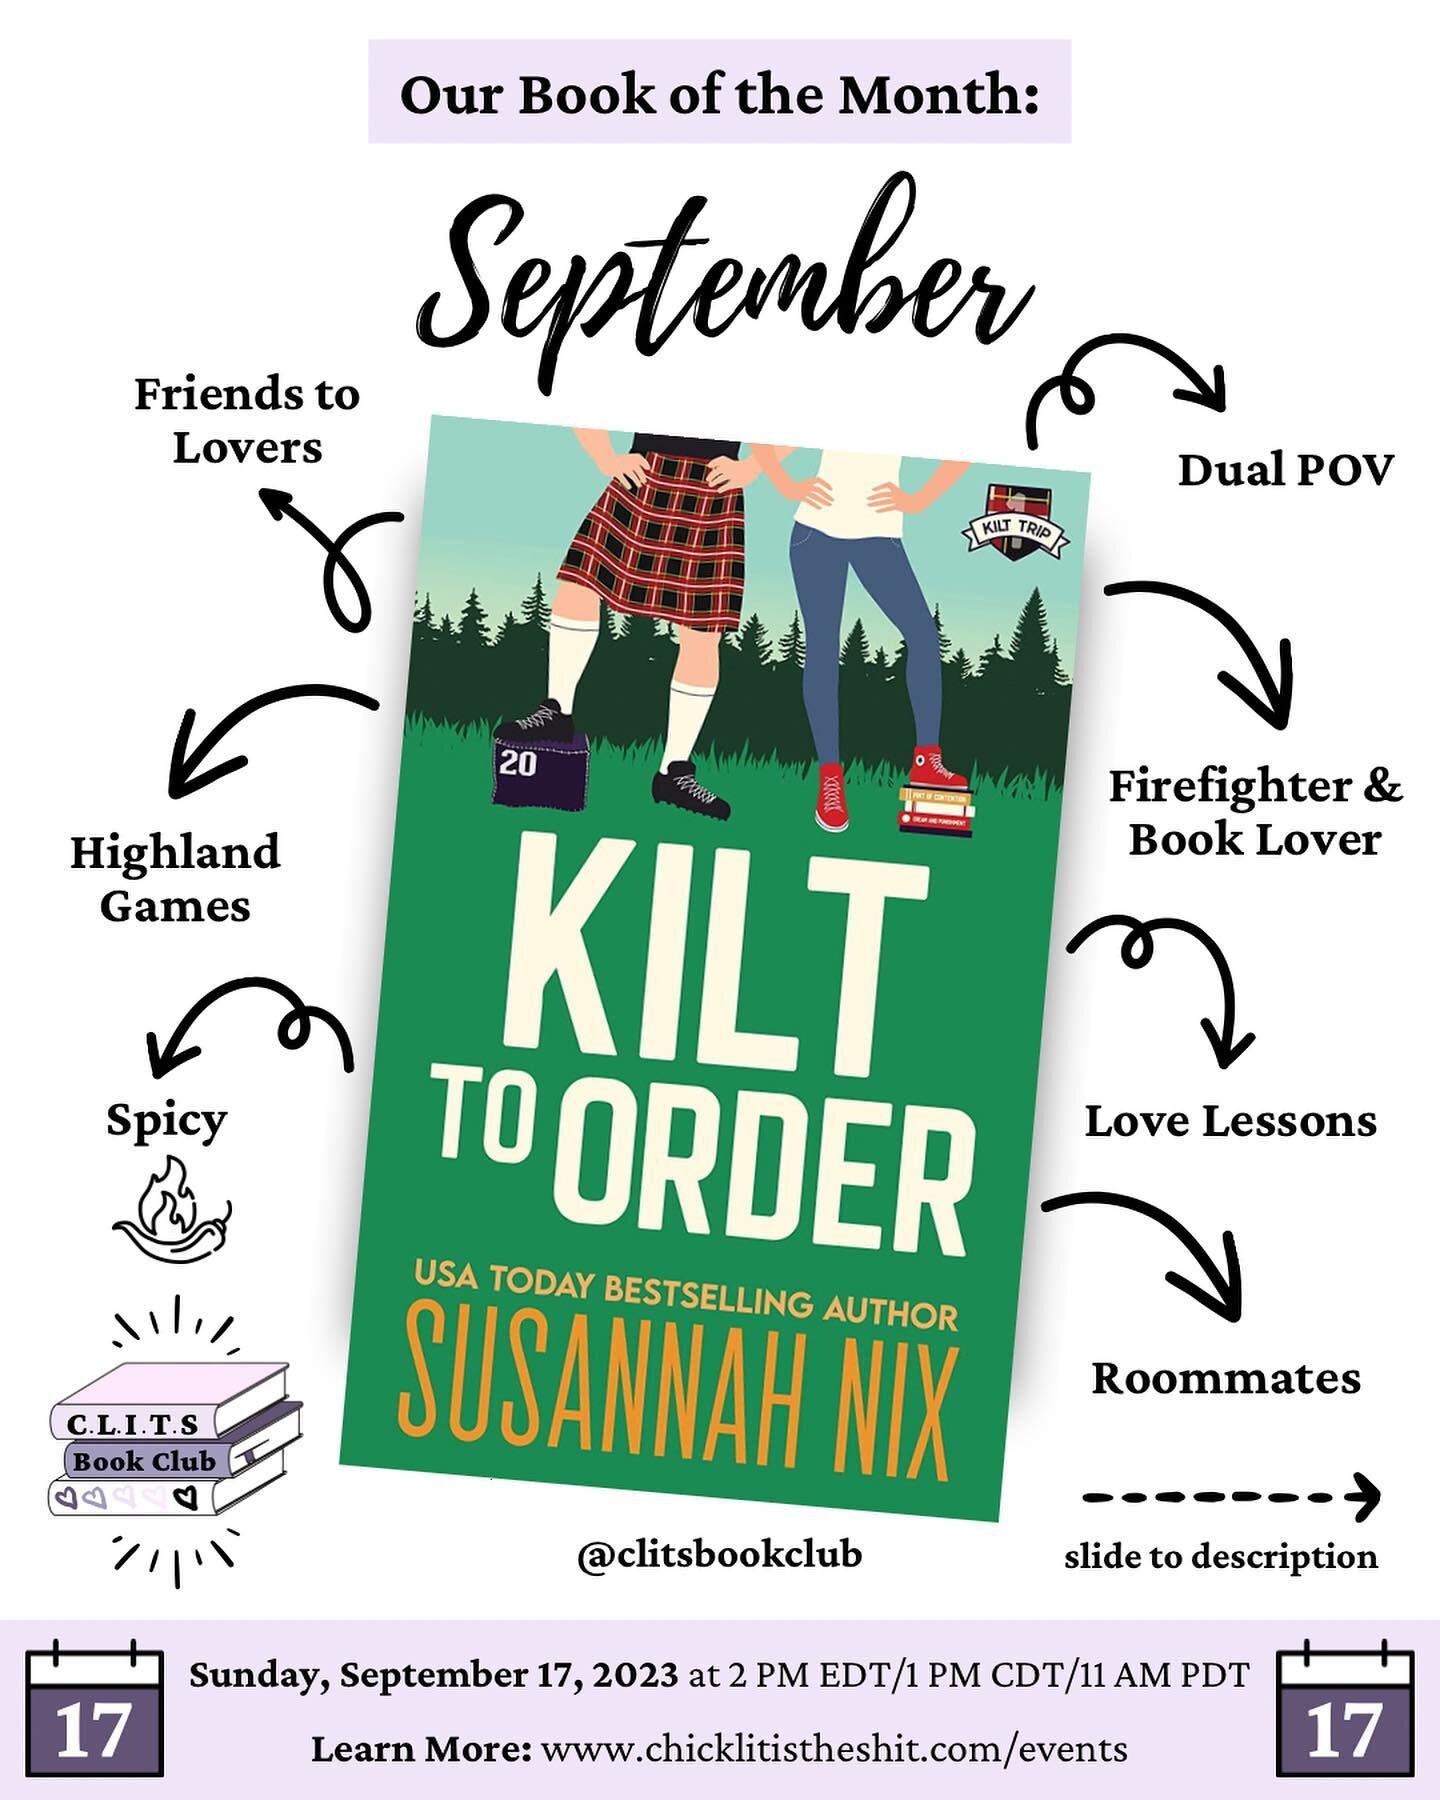 Book Club Pick: September 2023 🏋️ 🏴󠁧󠁢󠁳󠁣󠁴󠁿

This month we will be reading Kilt to Order by Susannah Nix @SusnnahNixAuthor

Join us Sunday, September 17 at 2 PM EDT/1 PM CDT/11 AM PDT

Sign up on my events page; link in bio 🔗 or use bit.ly/3Pa